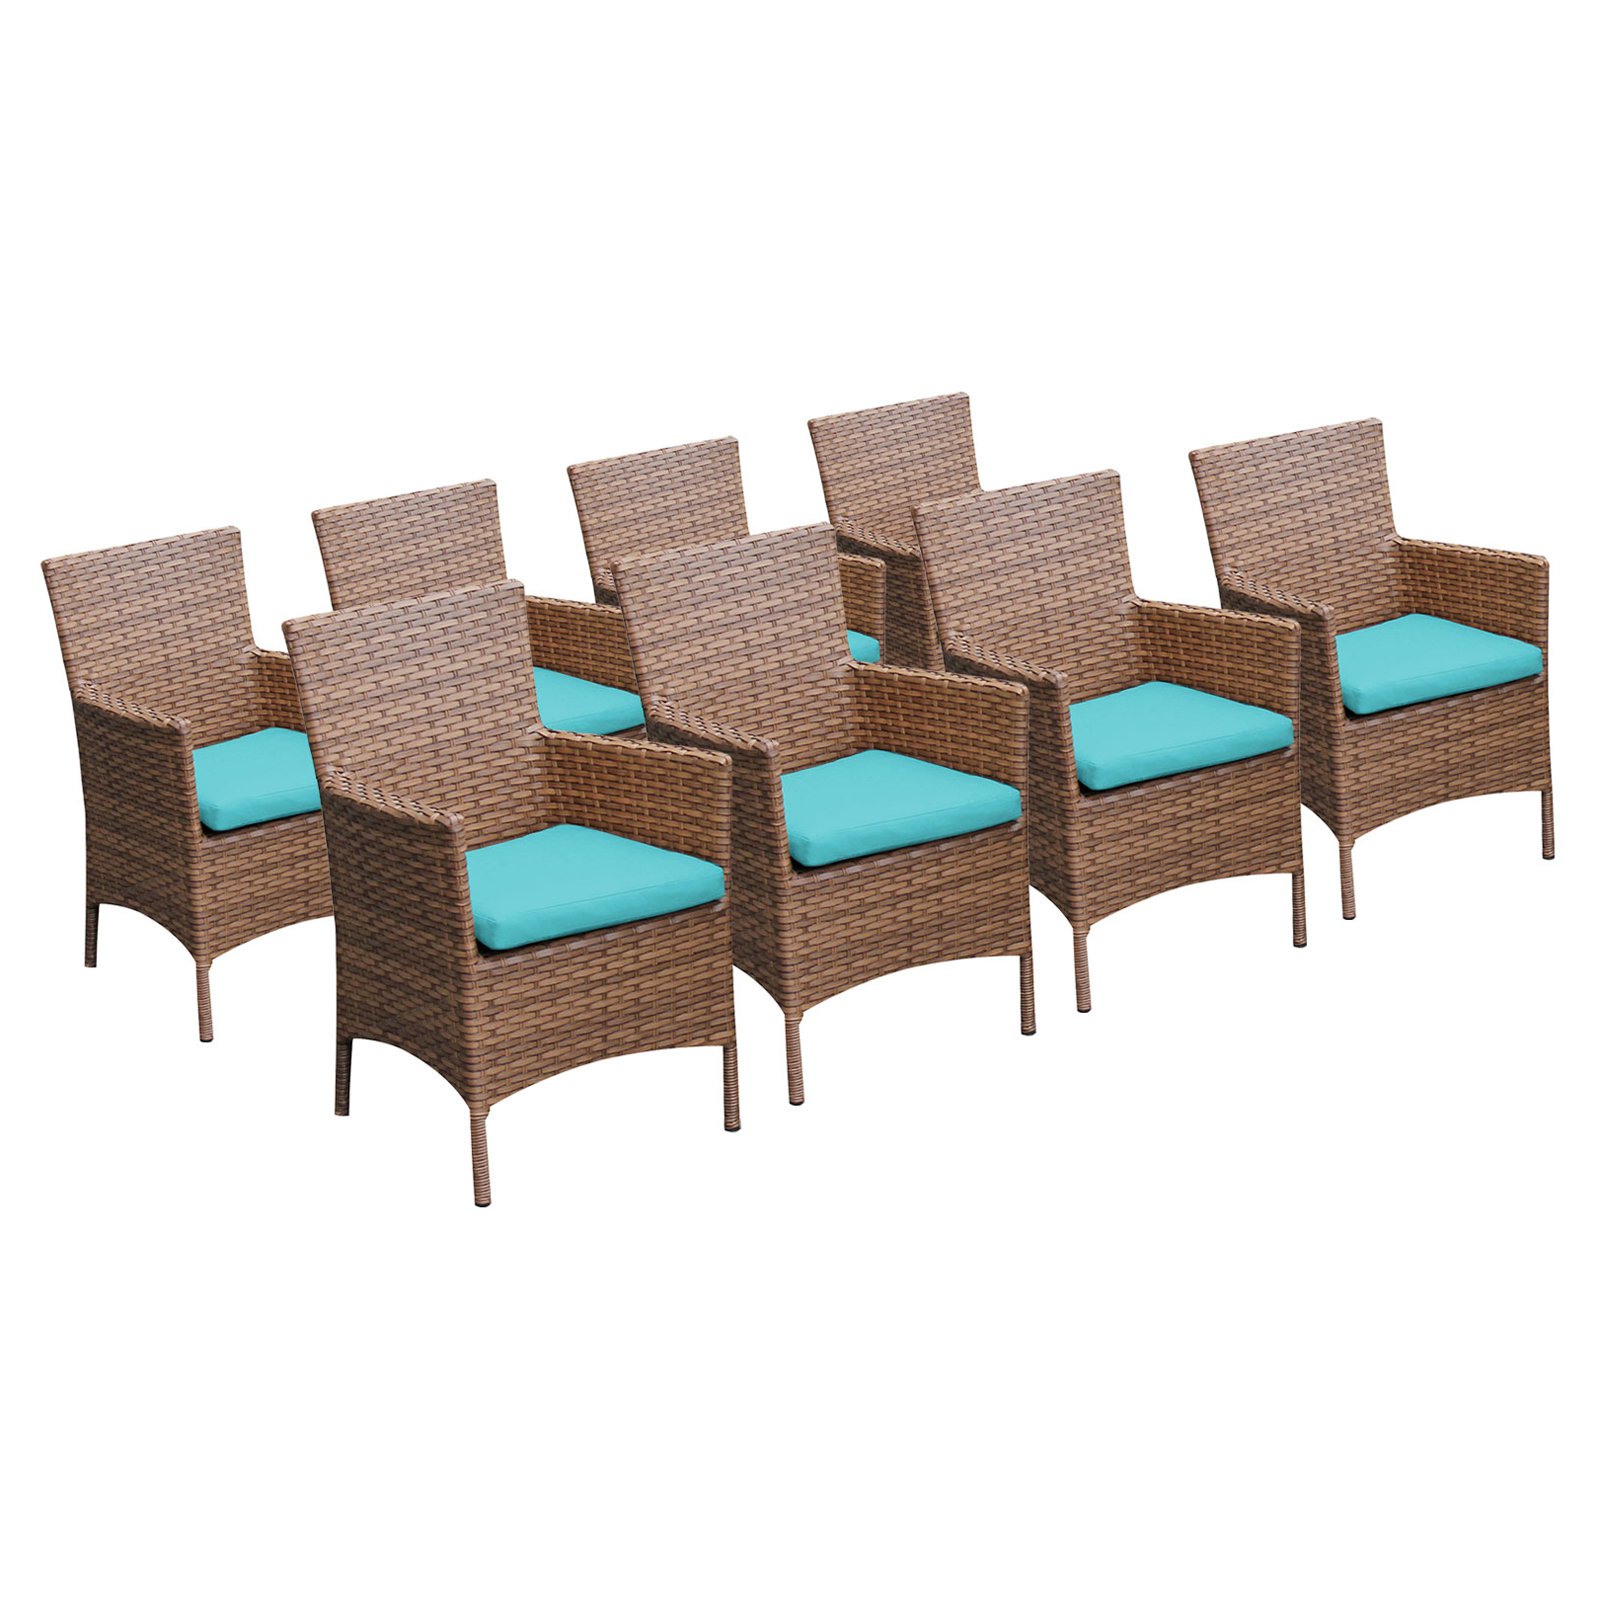 TK Classics Laguna Outdoor Dining Chairs - Set of 8 Chairs with 16 Cushion Covers - image 2 of 2